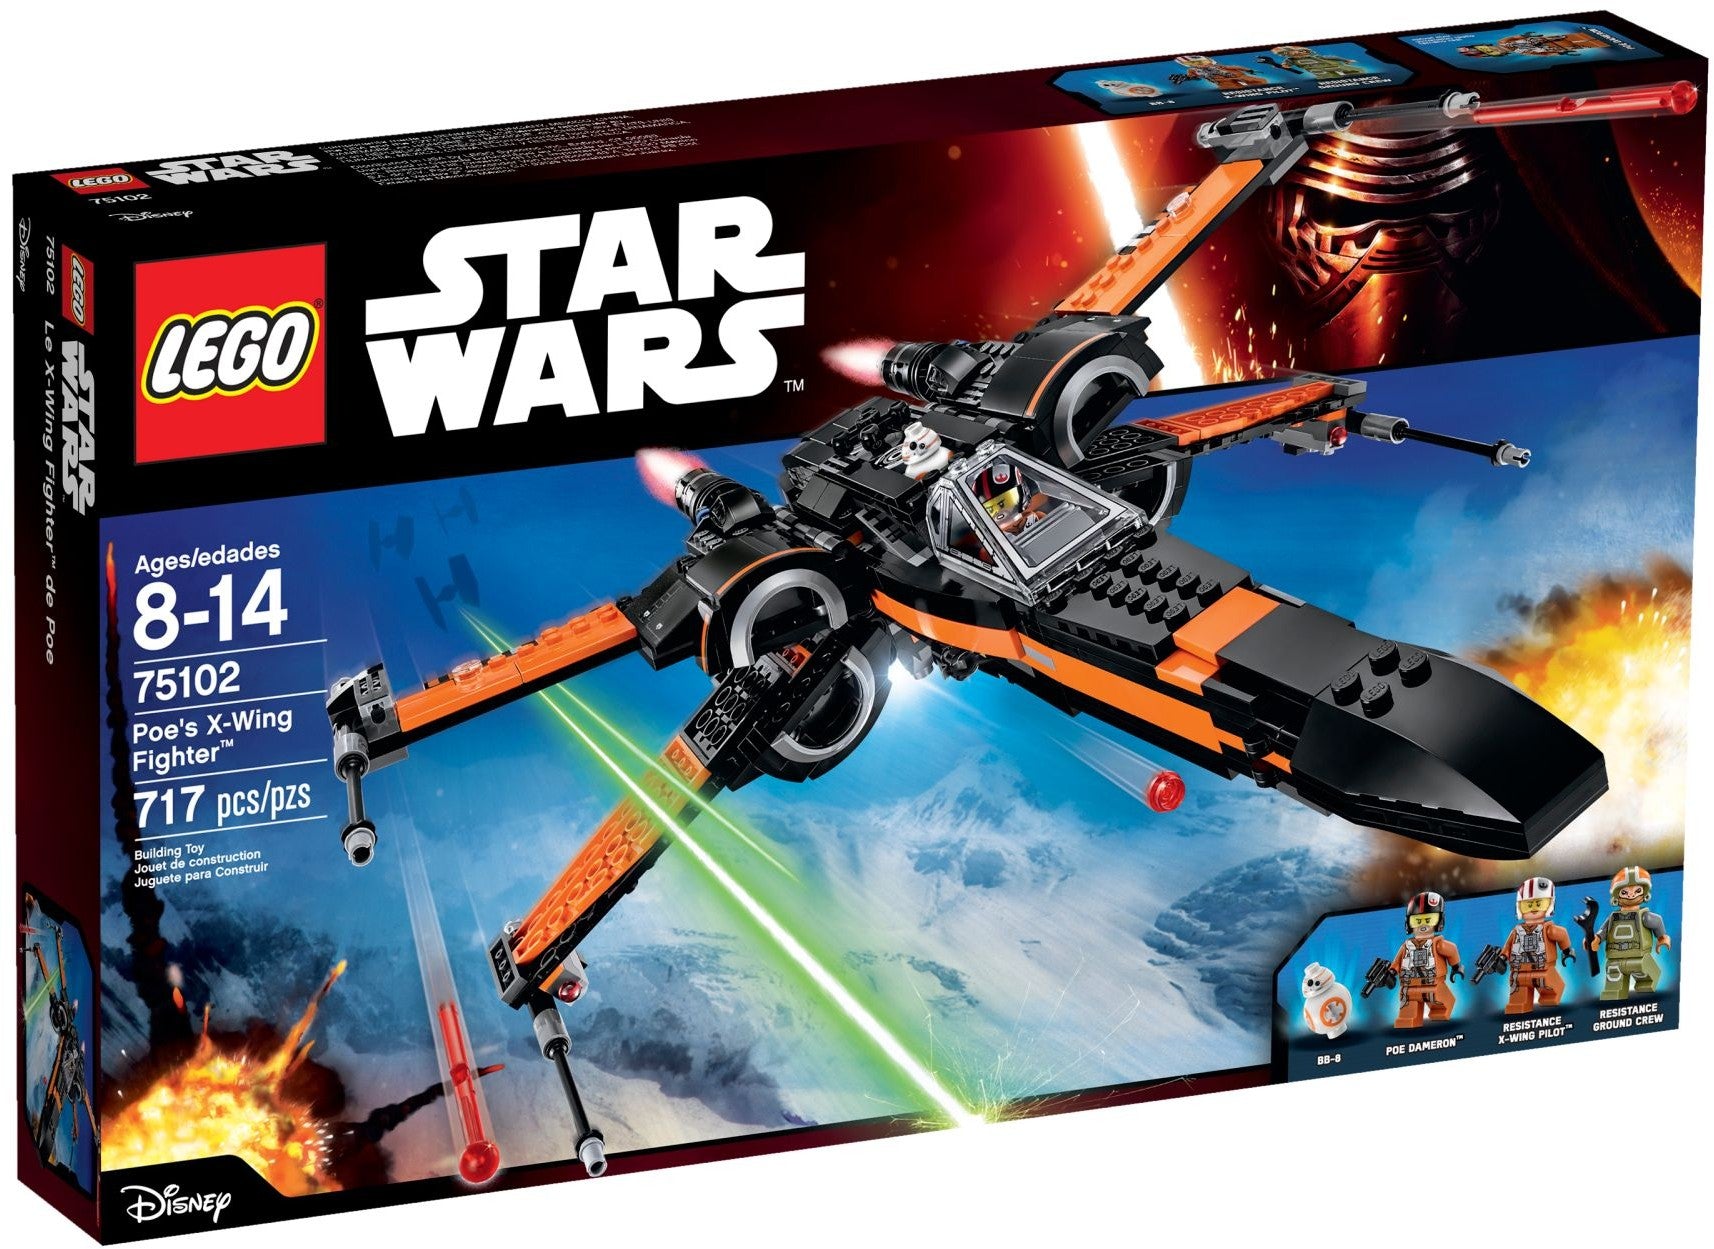 Lego Star Wars 75102 - Poe's X-wing Fighter